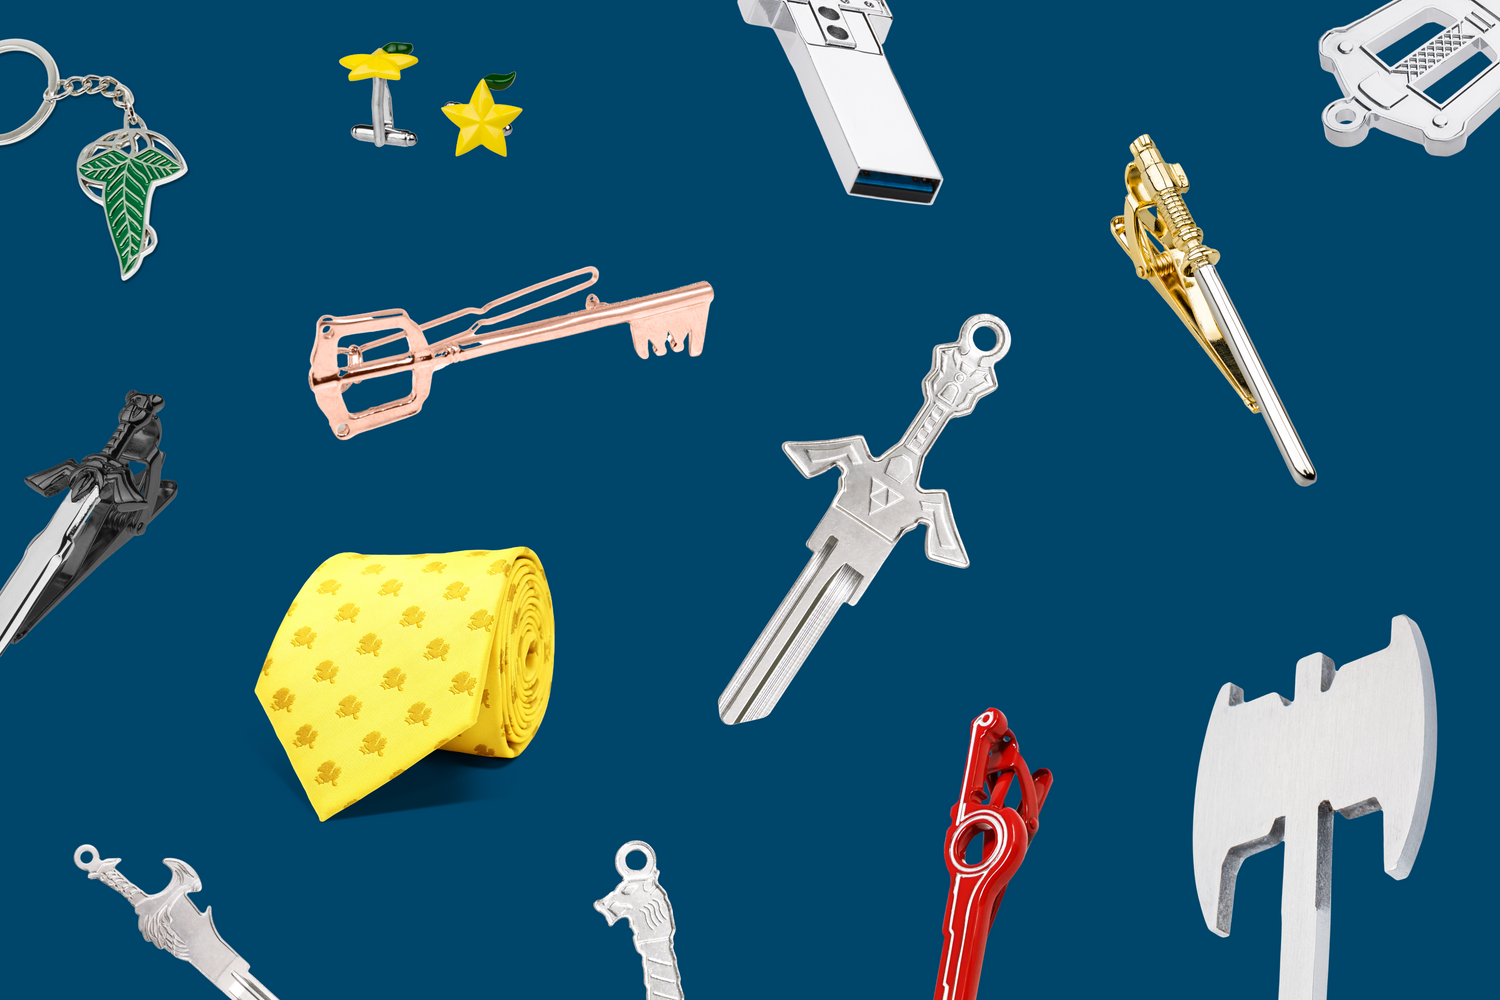 A variety of house keys, tie clips, ties and more on a deep blue background